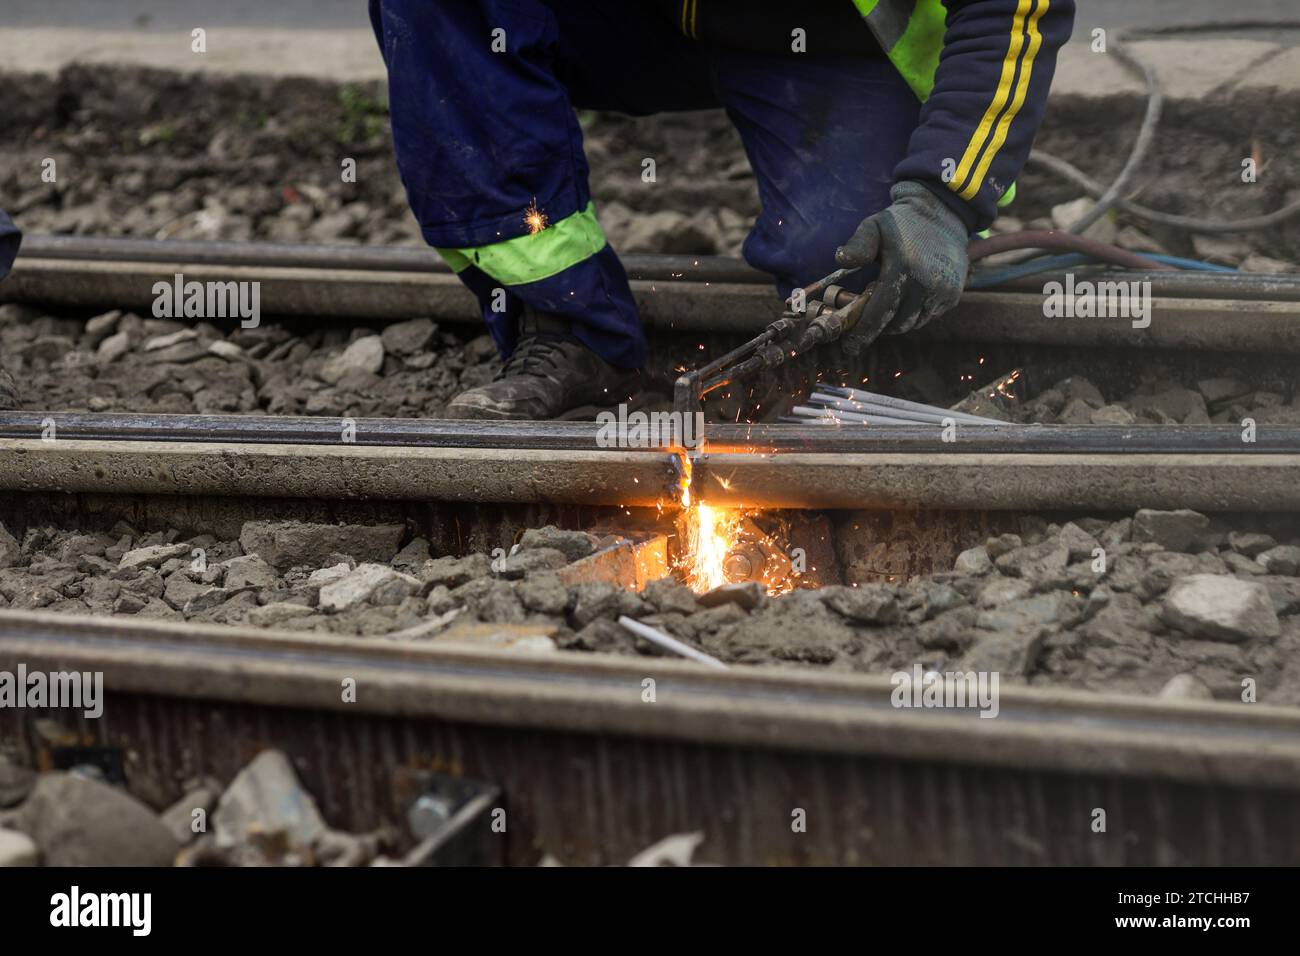 Details with a worker using an oxy-acetylene torch to cut metal tramway tracks. Stock Photo